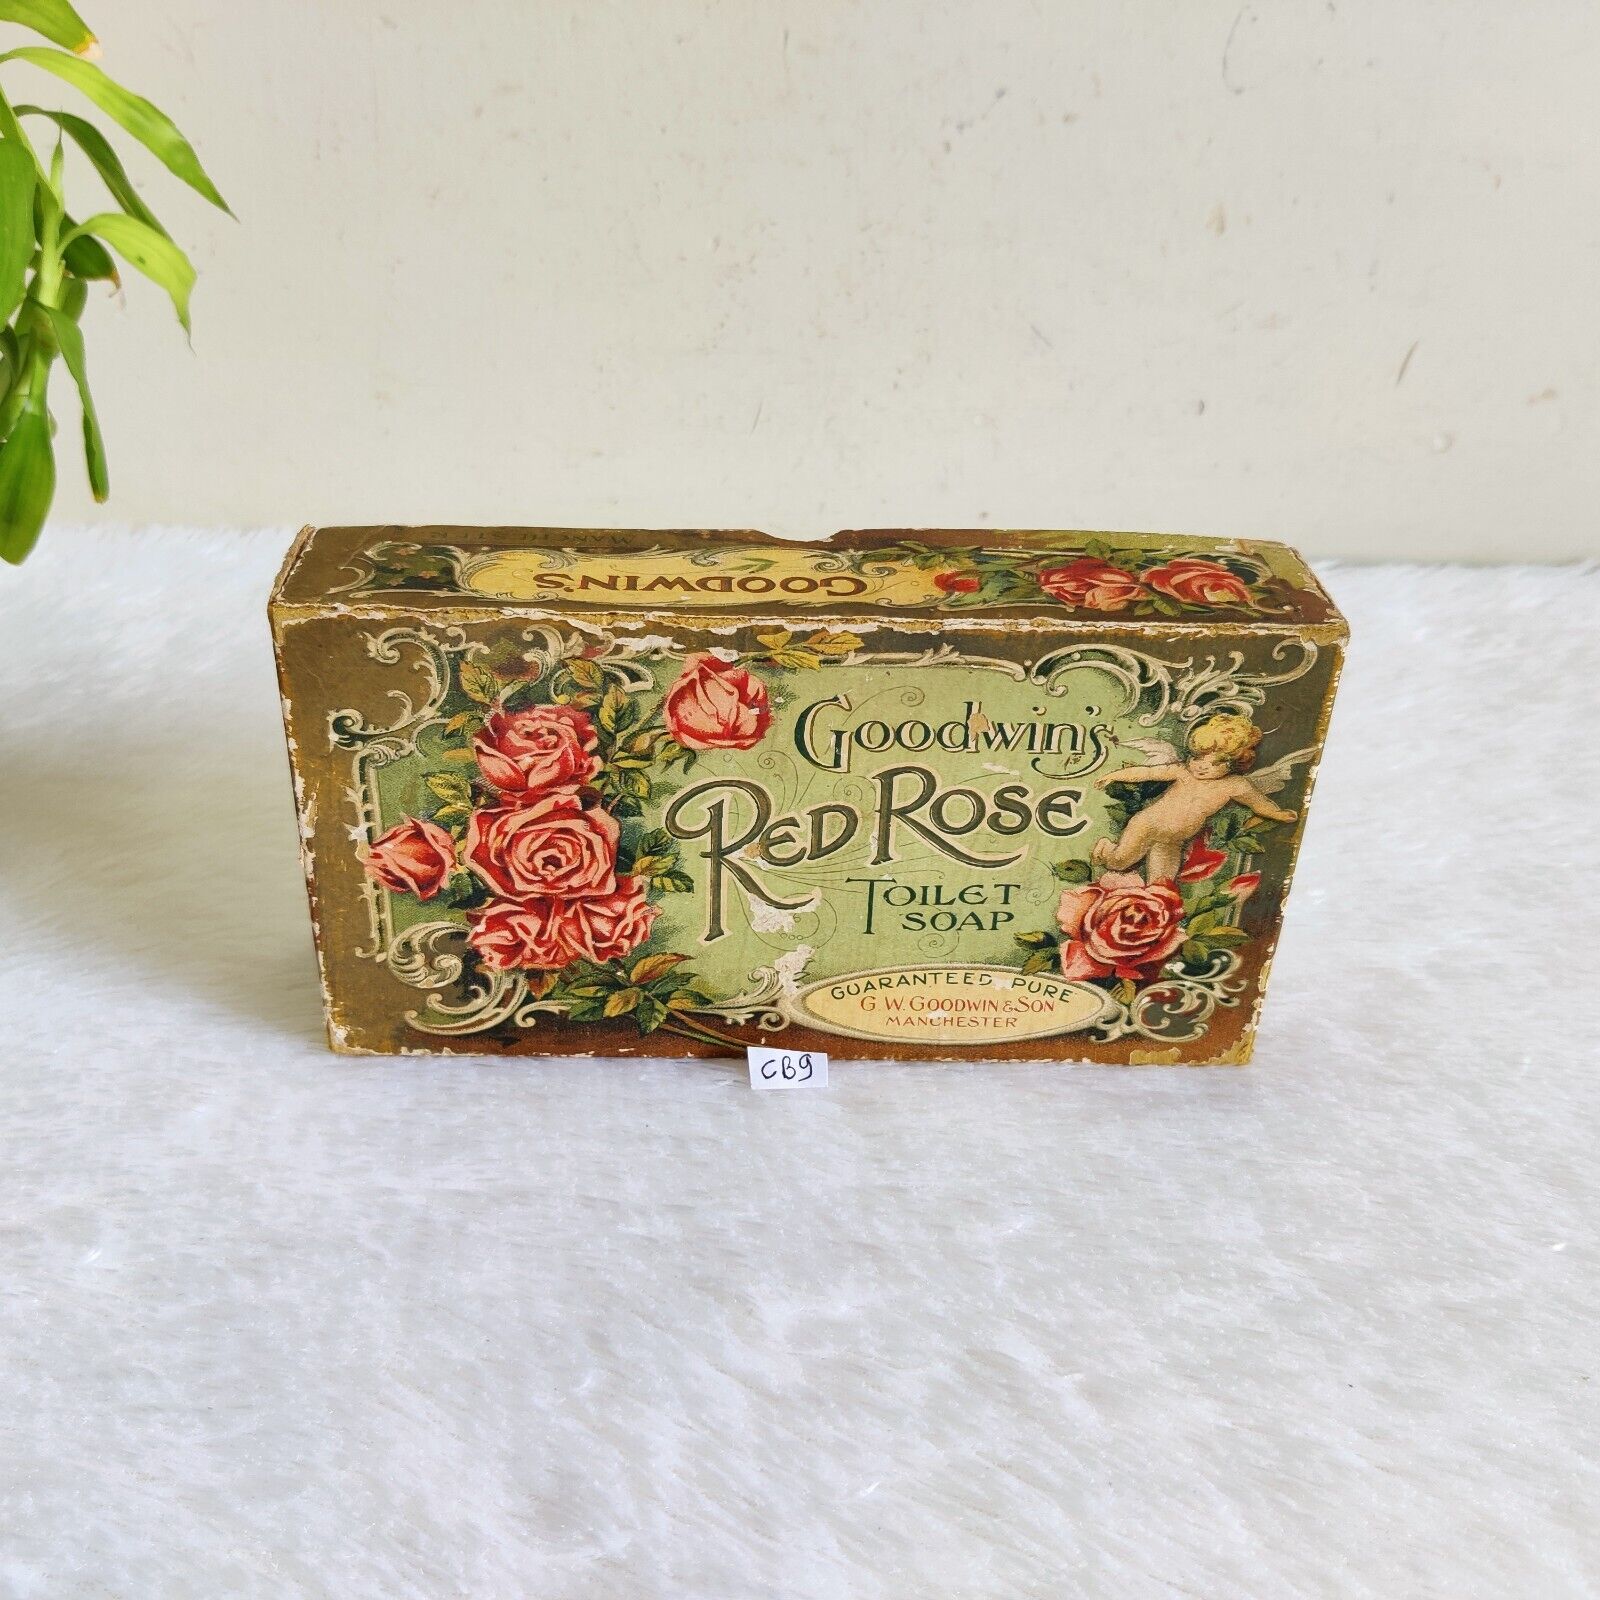 Vintage Goodwin's Red Rose Toilet Soap Advertising Cardboard Box England CB9